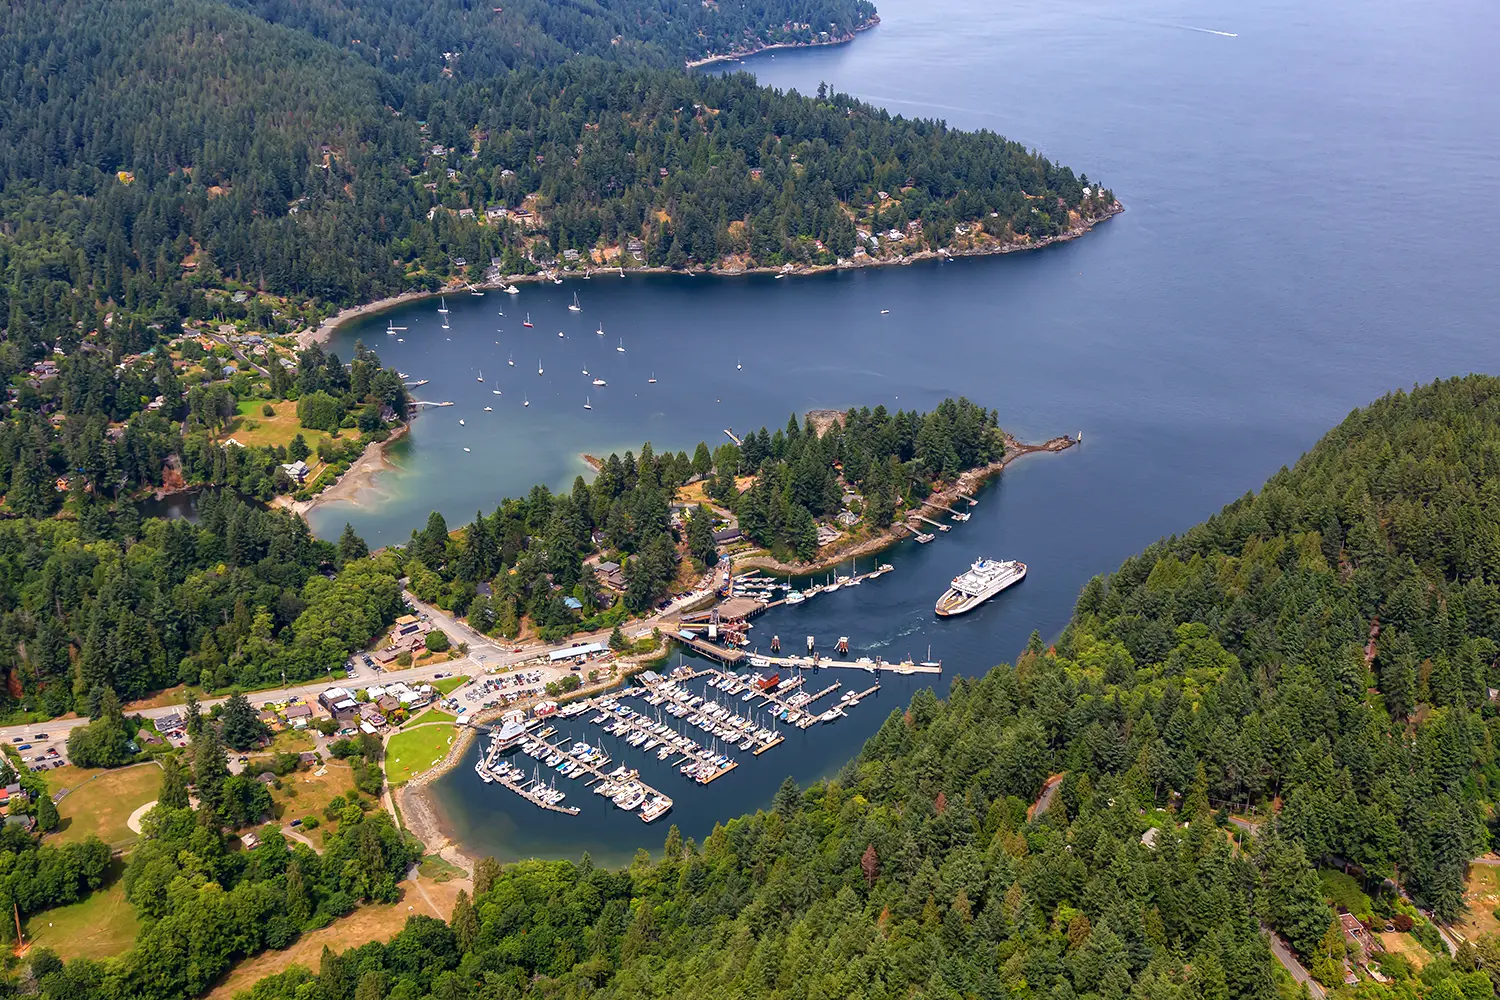 Snug Cove, Bowen Island, British Columbia, Canada. Aerial view of a marina and Ferry Terminal on the Island near Vancouver in Howe Sound.